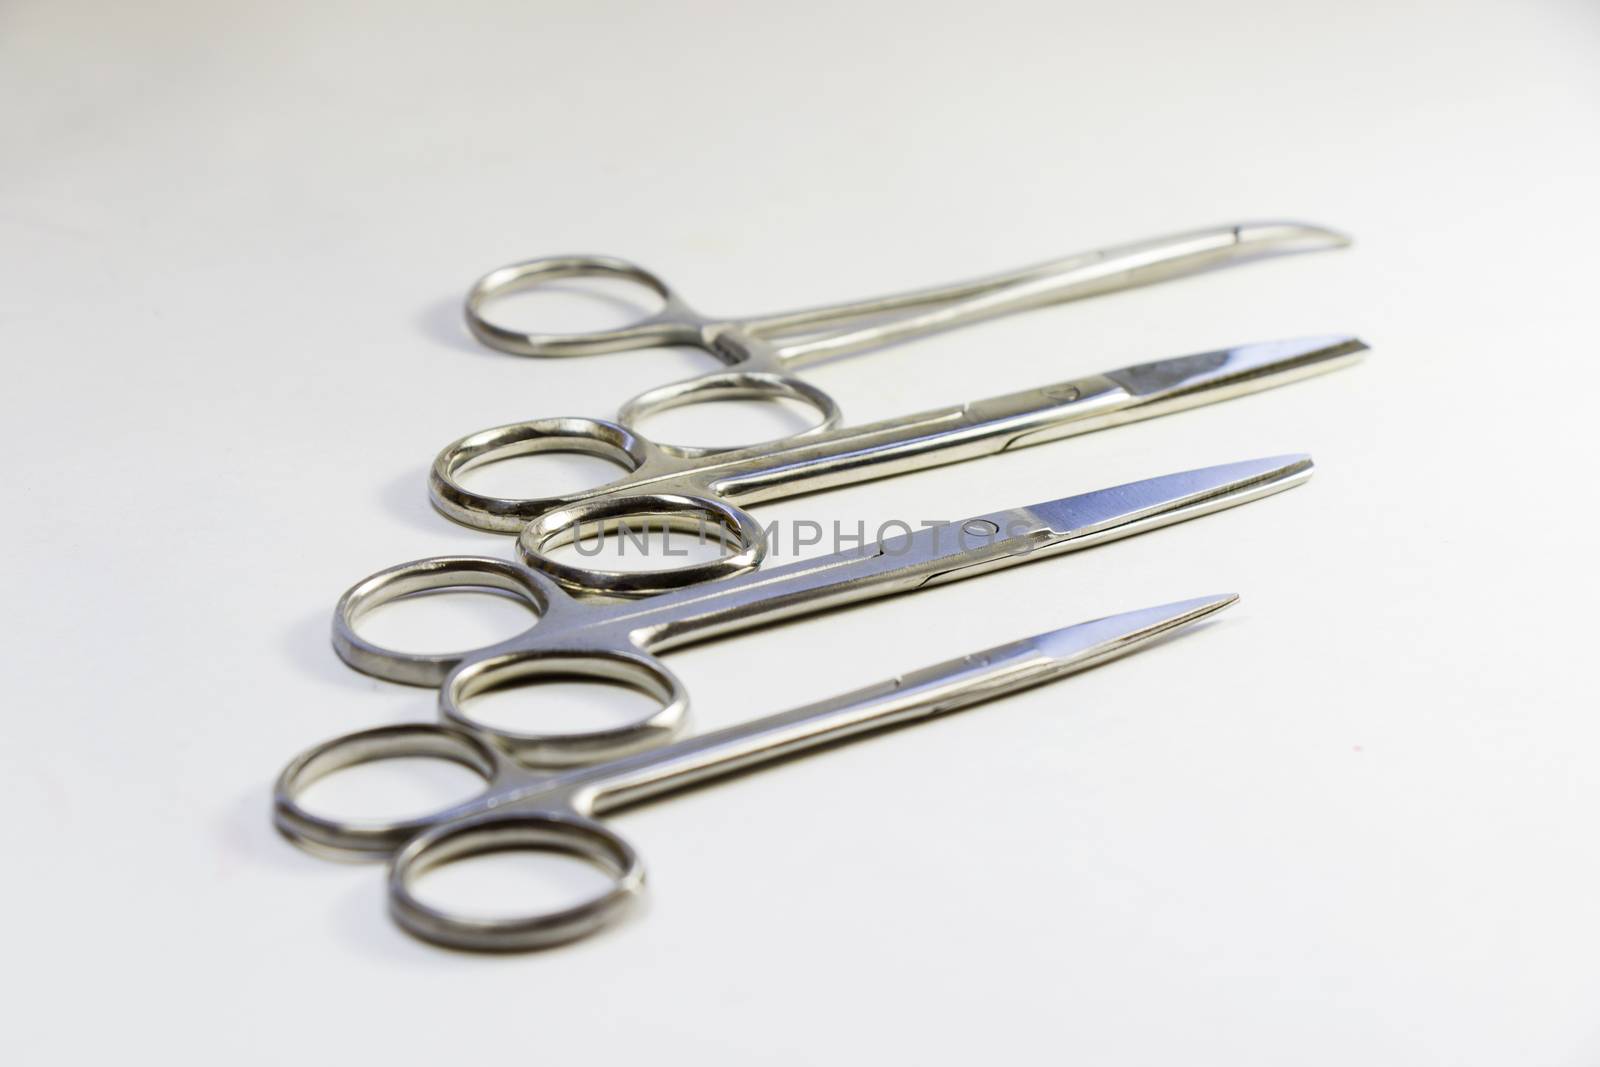 Dissection Kit - Premium Quality Stainless Steel Tools for Medical Students of Anatomy, Biology, Veterinary, Marine Biology with Scalpel Blades Included for Dissecting Frogs. Surgery instruments.Operation scissors.